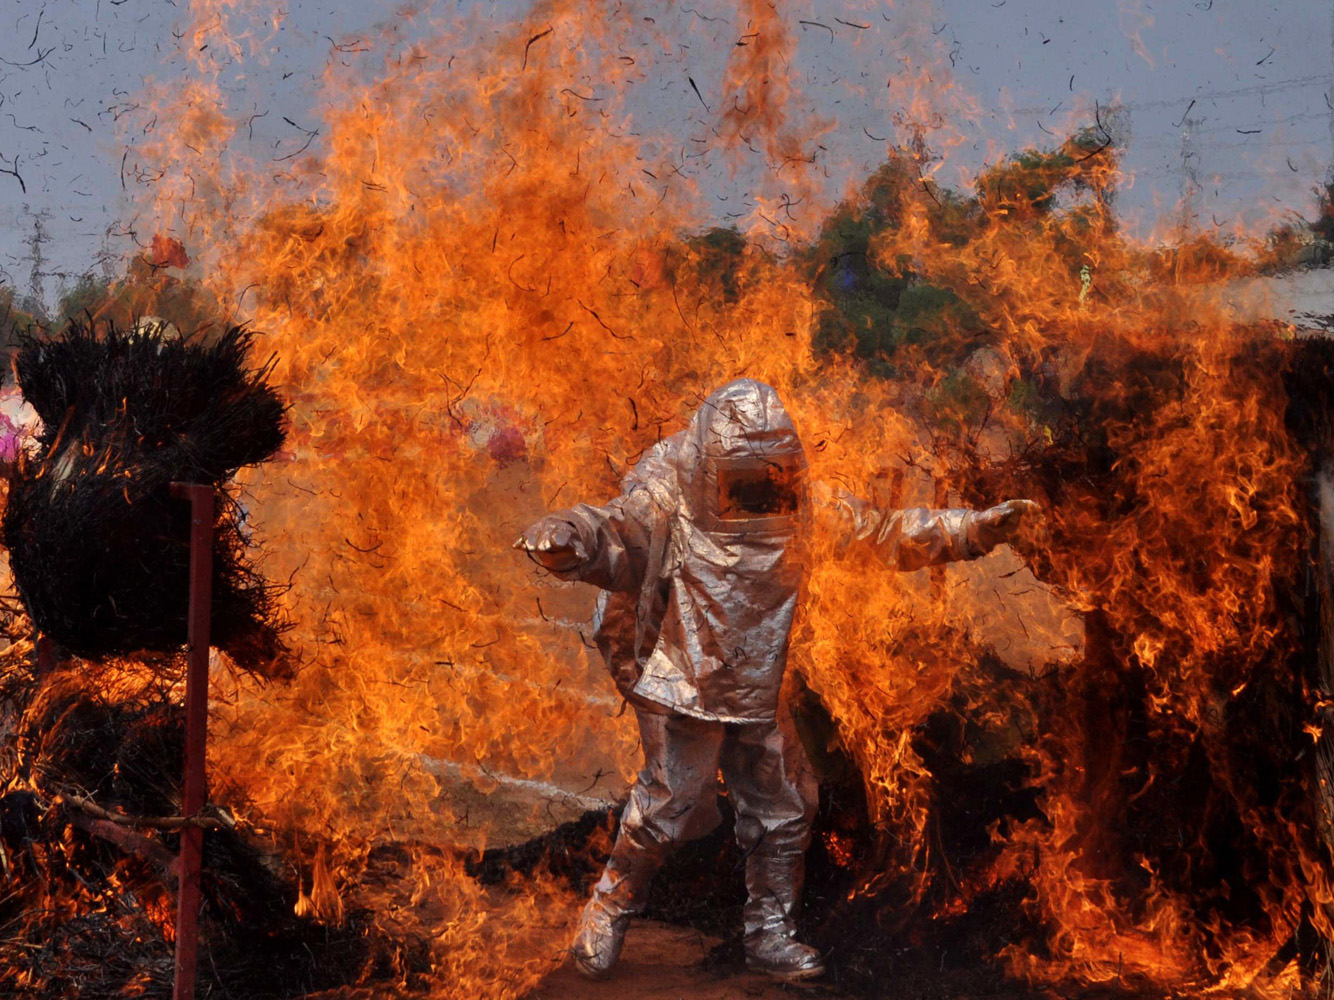 An Indian firefighter wearing a fire proximity suit walks through a wall of flames during a demonstration of their skills for Fire Safety Week in Bhubaneswar on April 15, 2014.